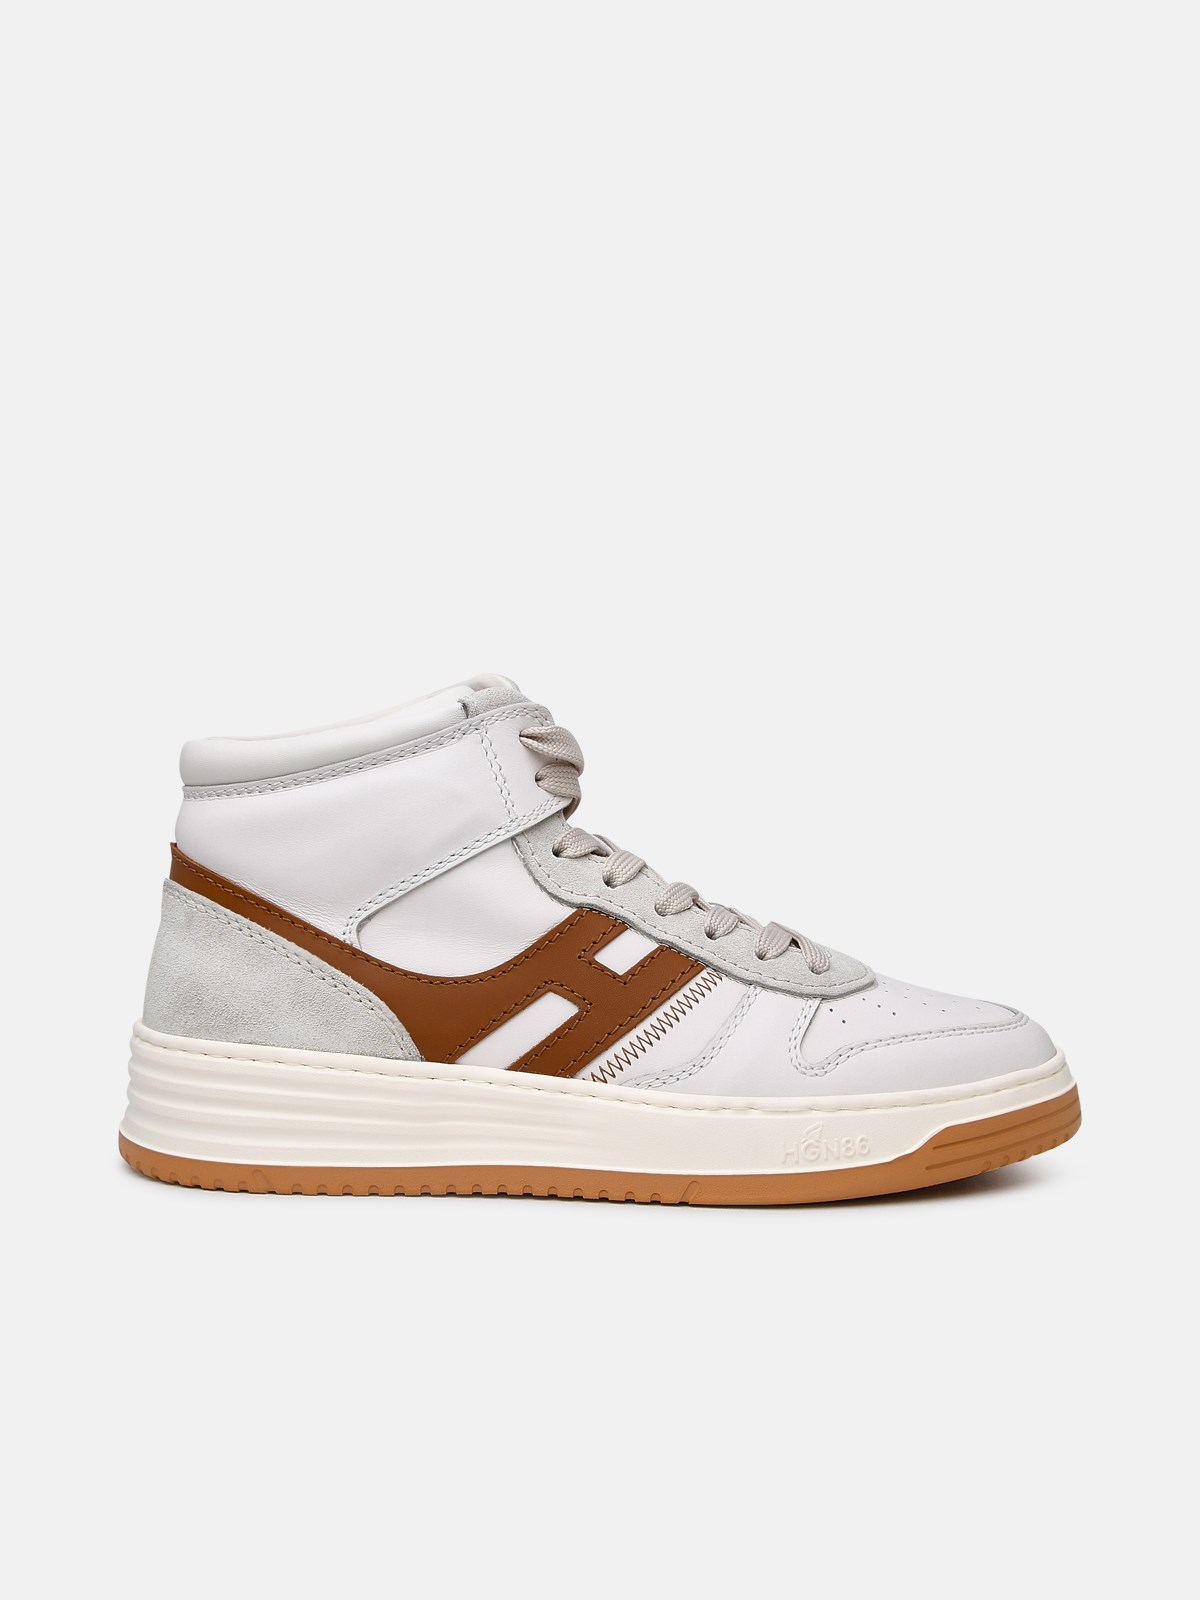 Hogan H630 White Leather Sneakers In Beige